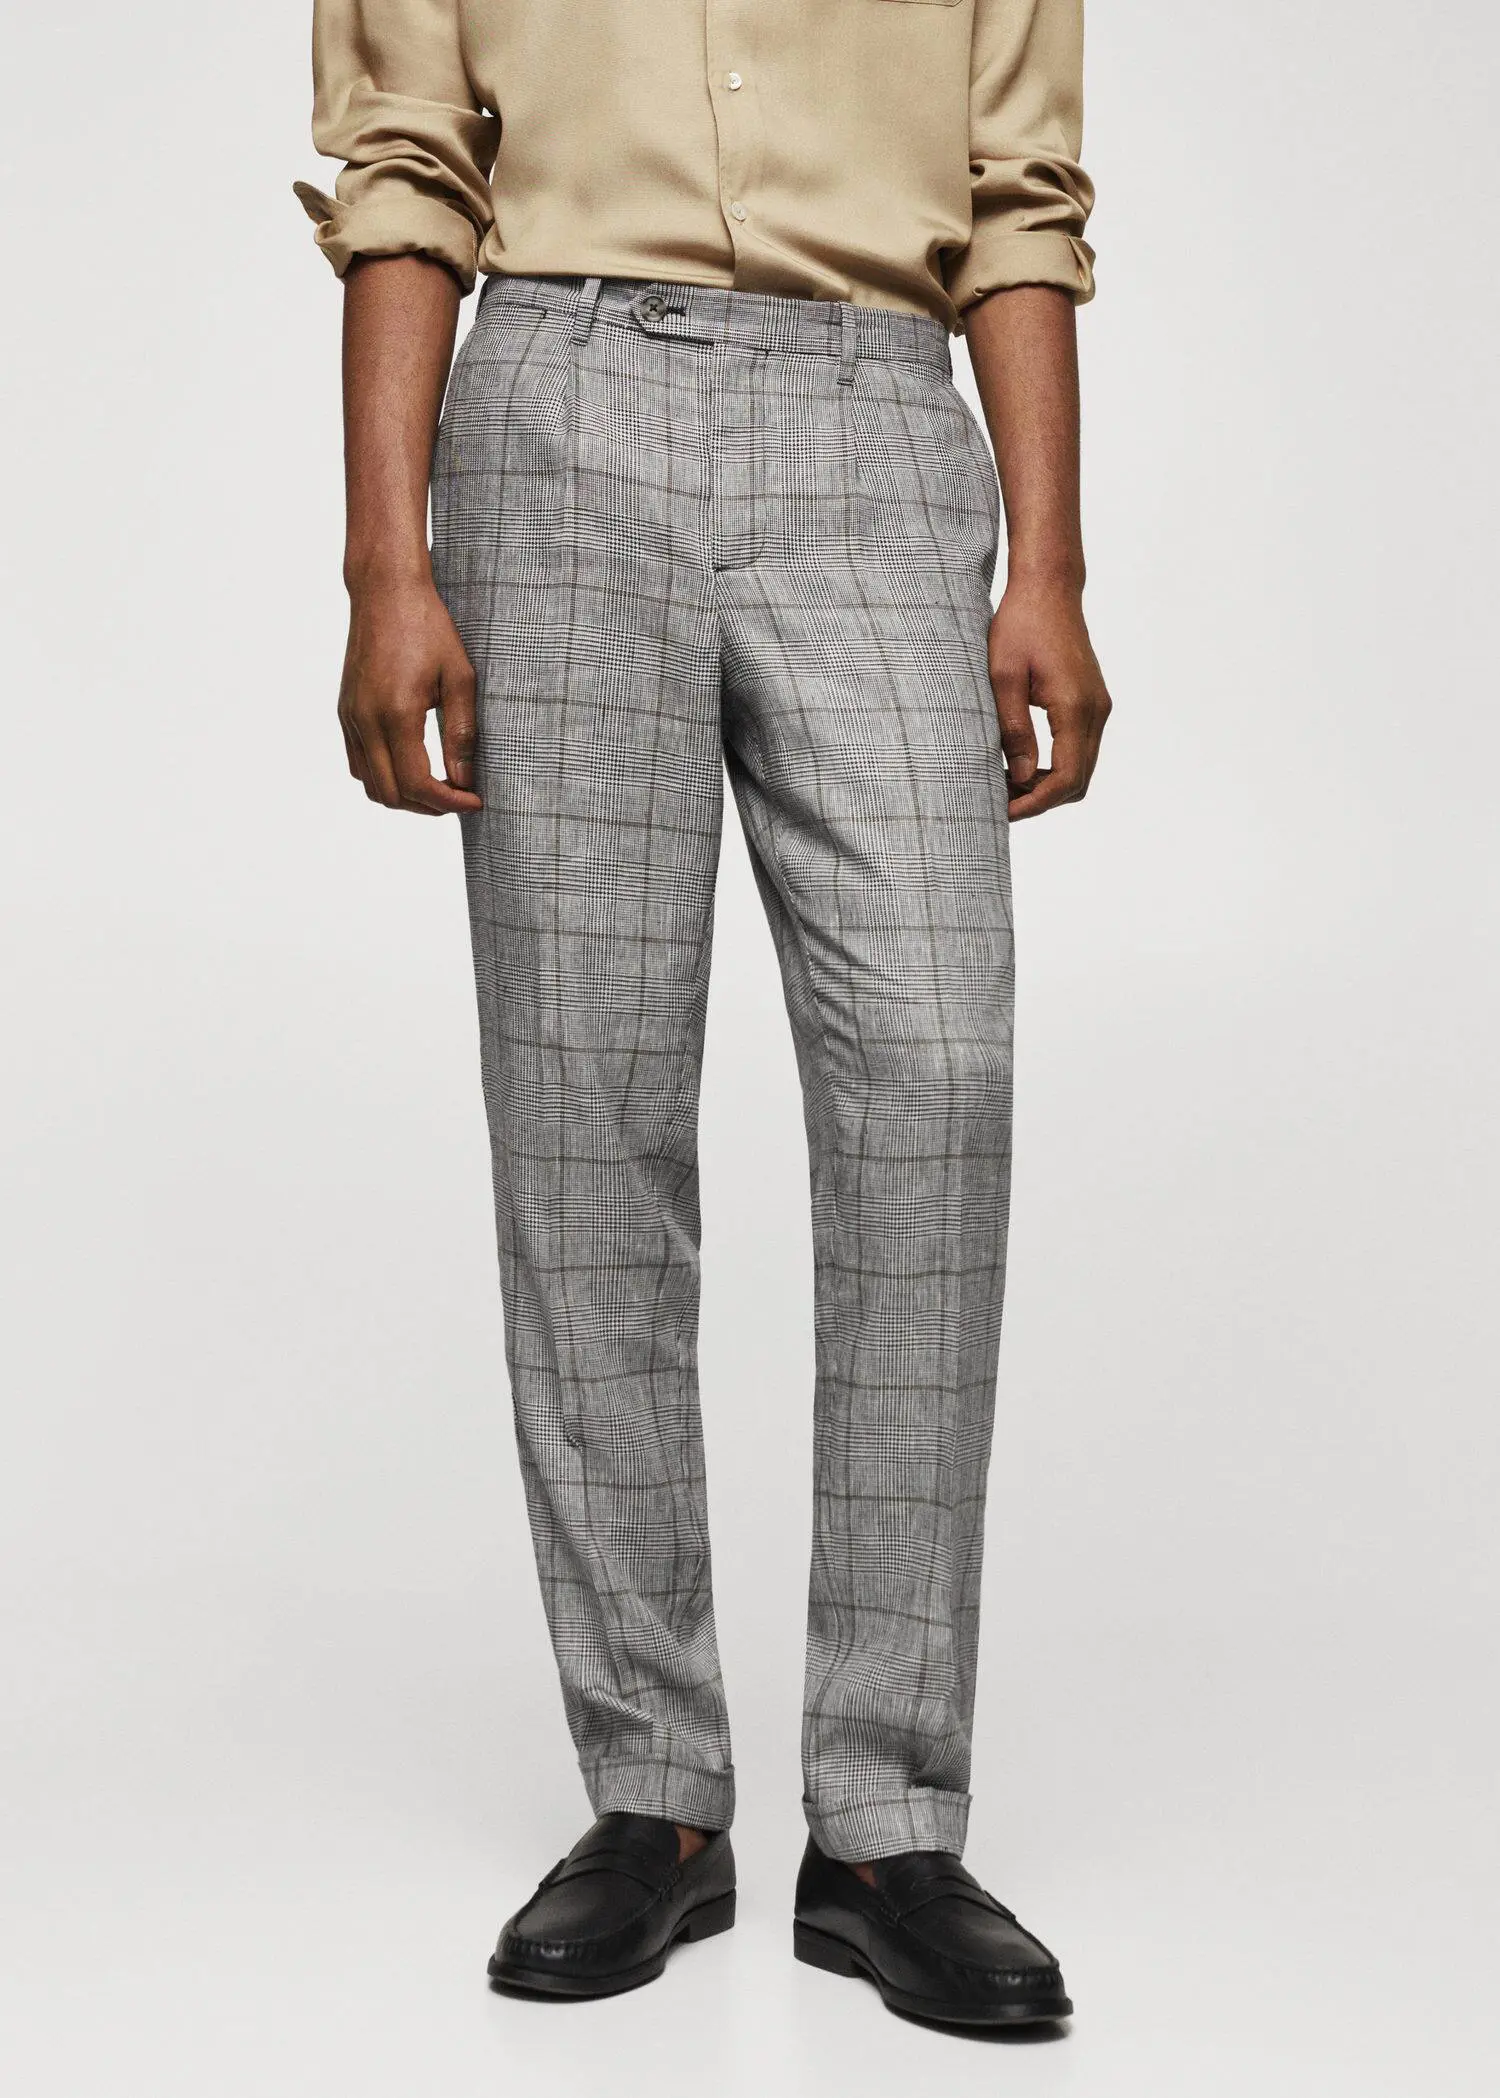 Mango Prince of Wales linen-blend trousers. a man wearing a suit and tie standing up. 